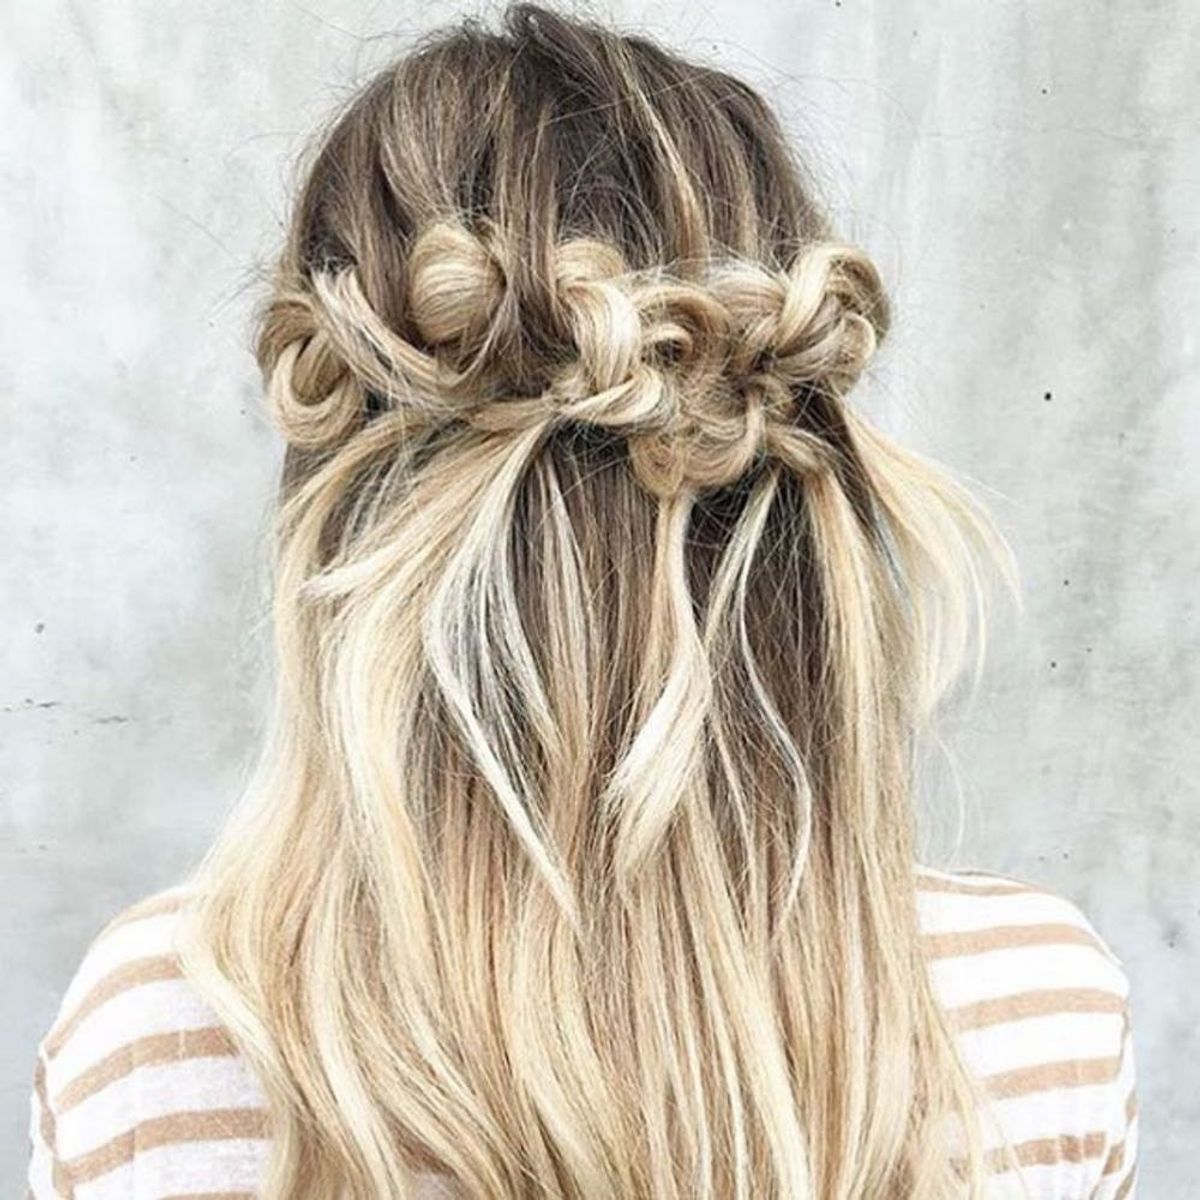 10 Messy Braids You Can Totally Wear to Work